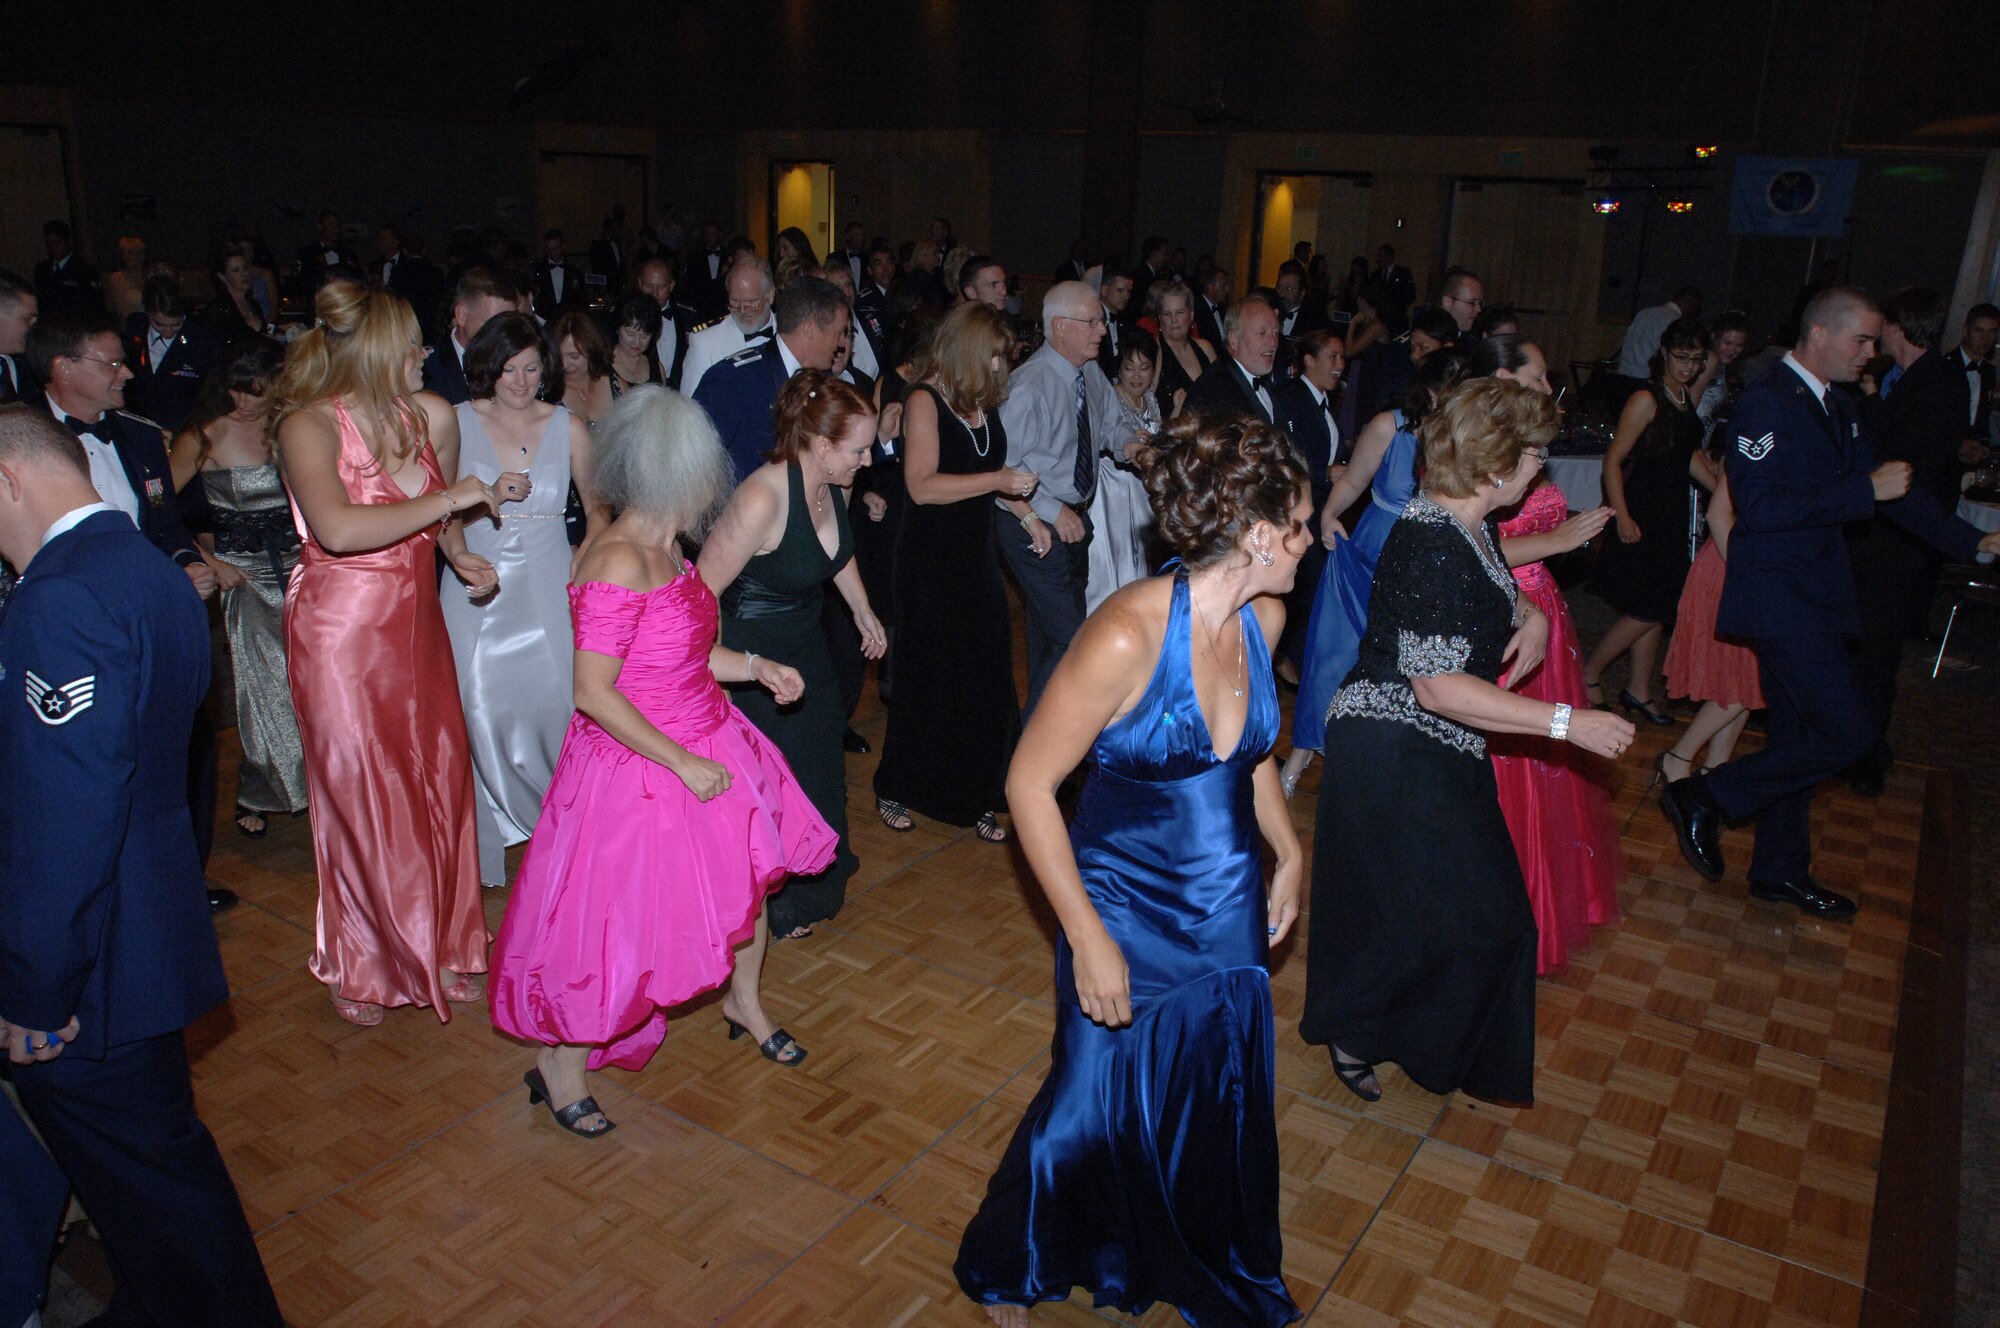 HILL AIR FORCE BASE, Utah-- Team Hill members dance the night away after the official portion of the Hill Air Force Base "Heritage to Horizons" Air Force 60th Anniversary ball held at the Eccles Conference center. (U.S. Air Force photo by Alex R. Lloyd)